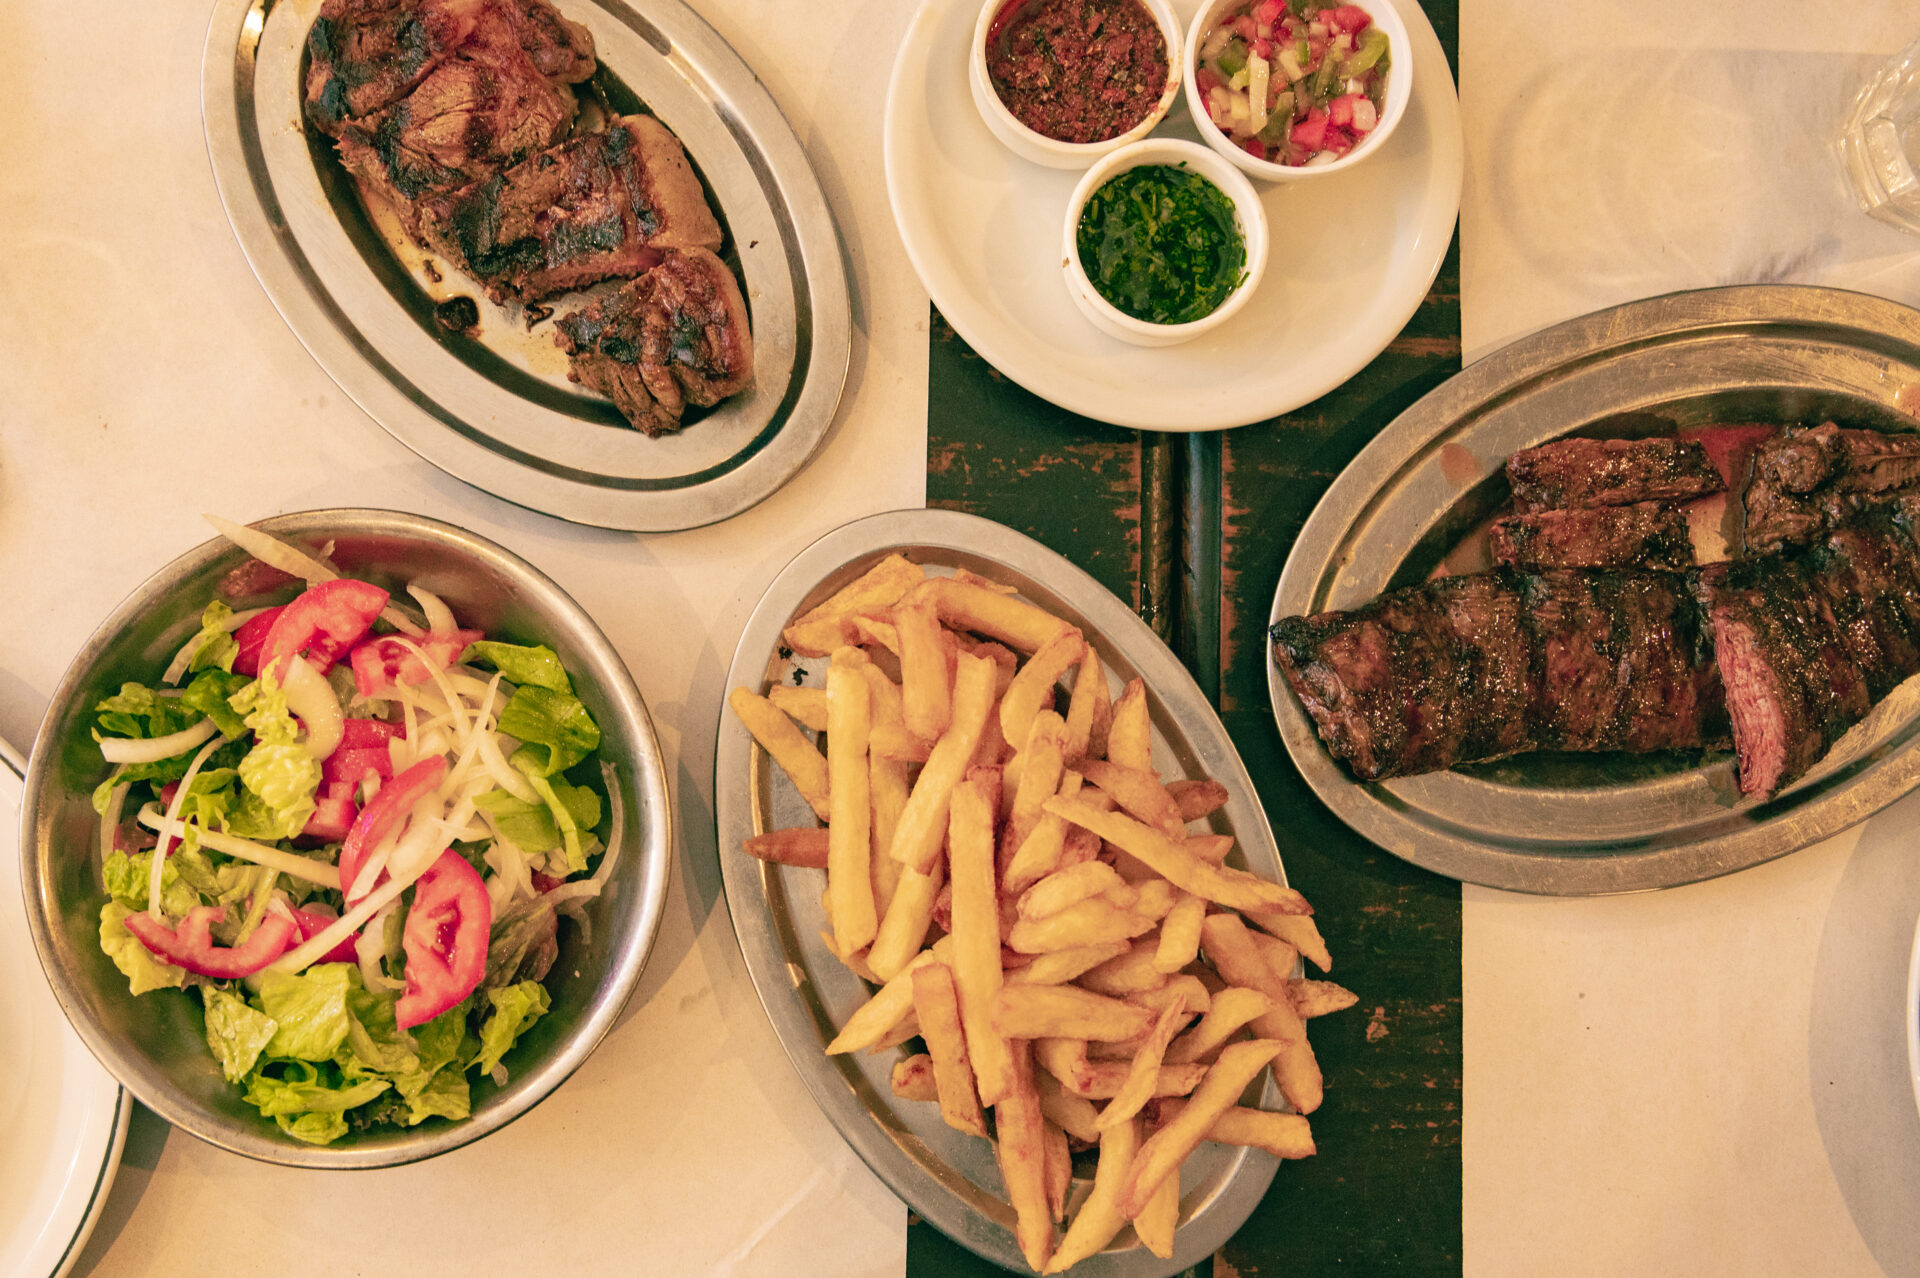 Steak, fries, salad and three small bowls containing chimichurri, salsa criolla and provenzal sauce. Steak is an integral part of Argentina's Food Culture and the most internationally recognized Argentine food.